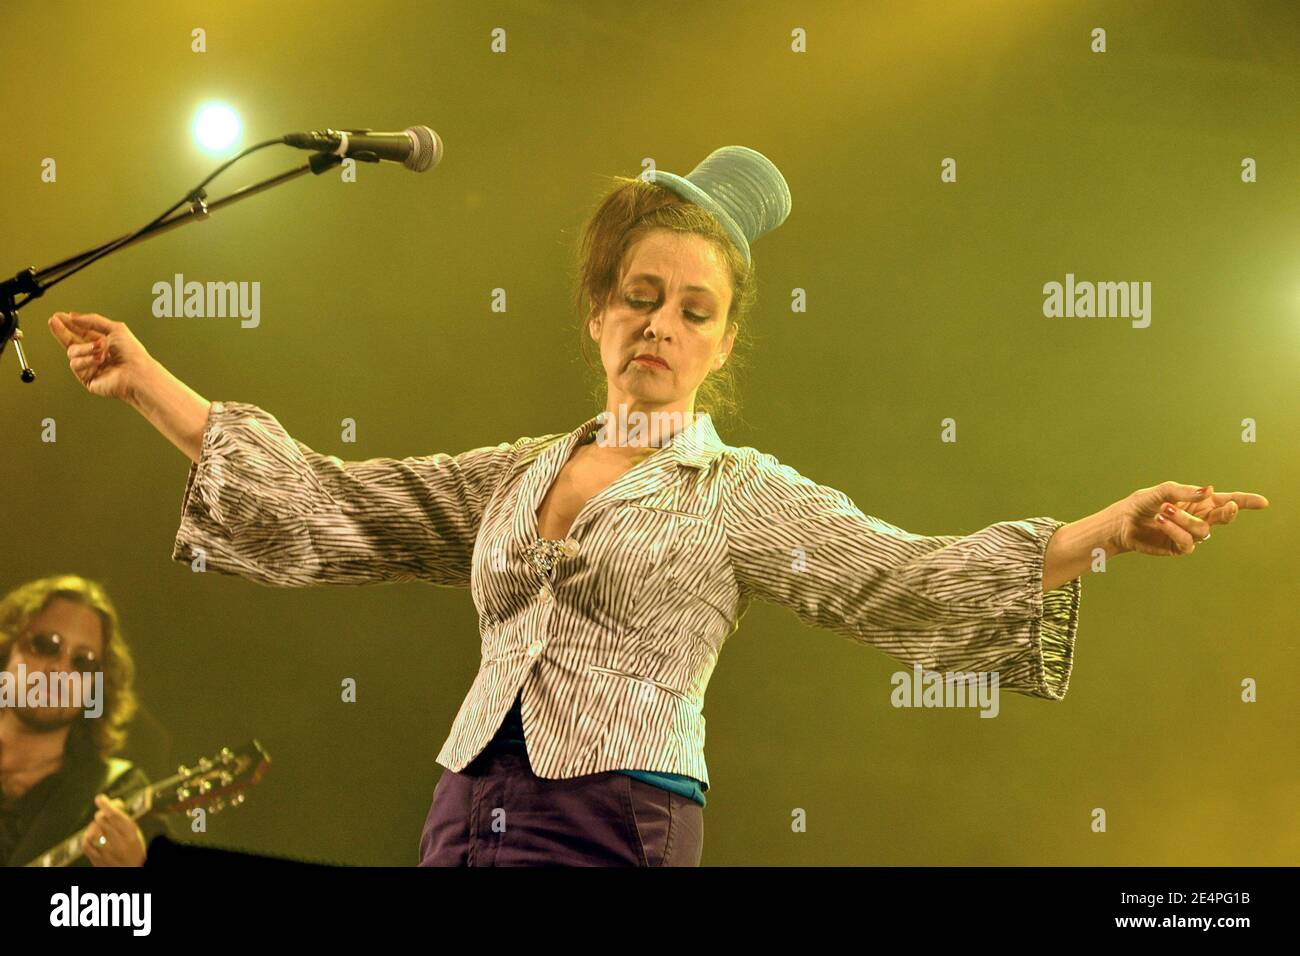 Singer Catherine Ringer from the french band les Rita Mitsouko performs  live on stage during 5th edition of the 'Rock en Seine' music festival, at  Saint-Cloud near Paris, France, on August 25,